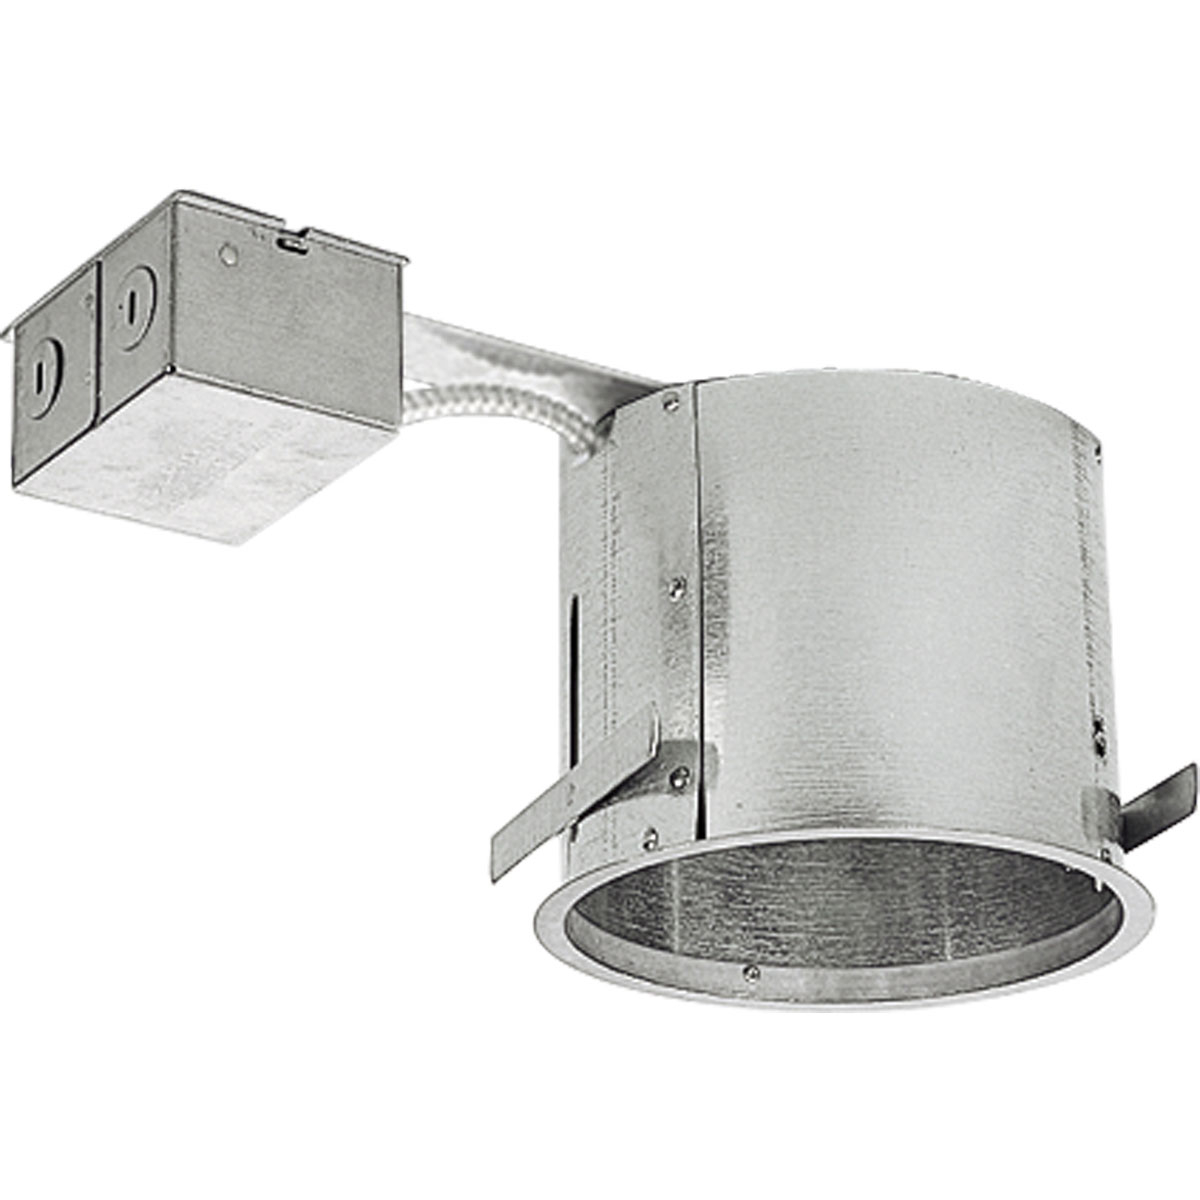 For use in existing ceilings. Integral flange on housing and exclusive locking bars permit quick mounting in ceilings from 1/2 in to 1 in thick. UL and CUL listed for damp locations.